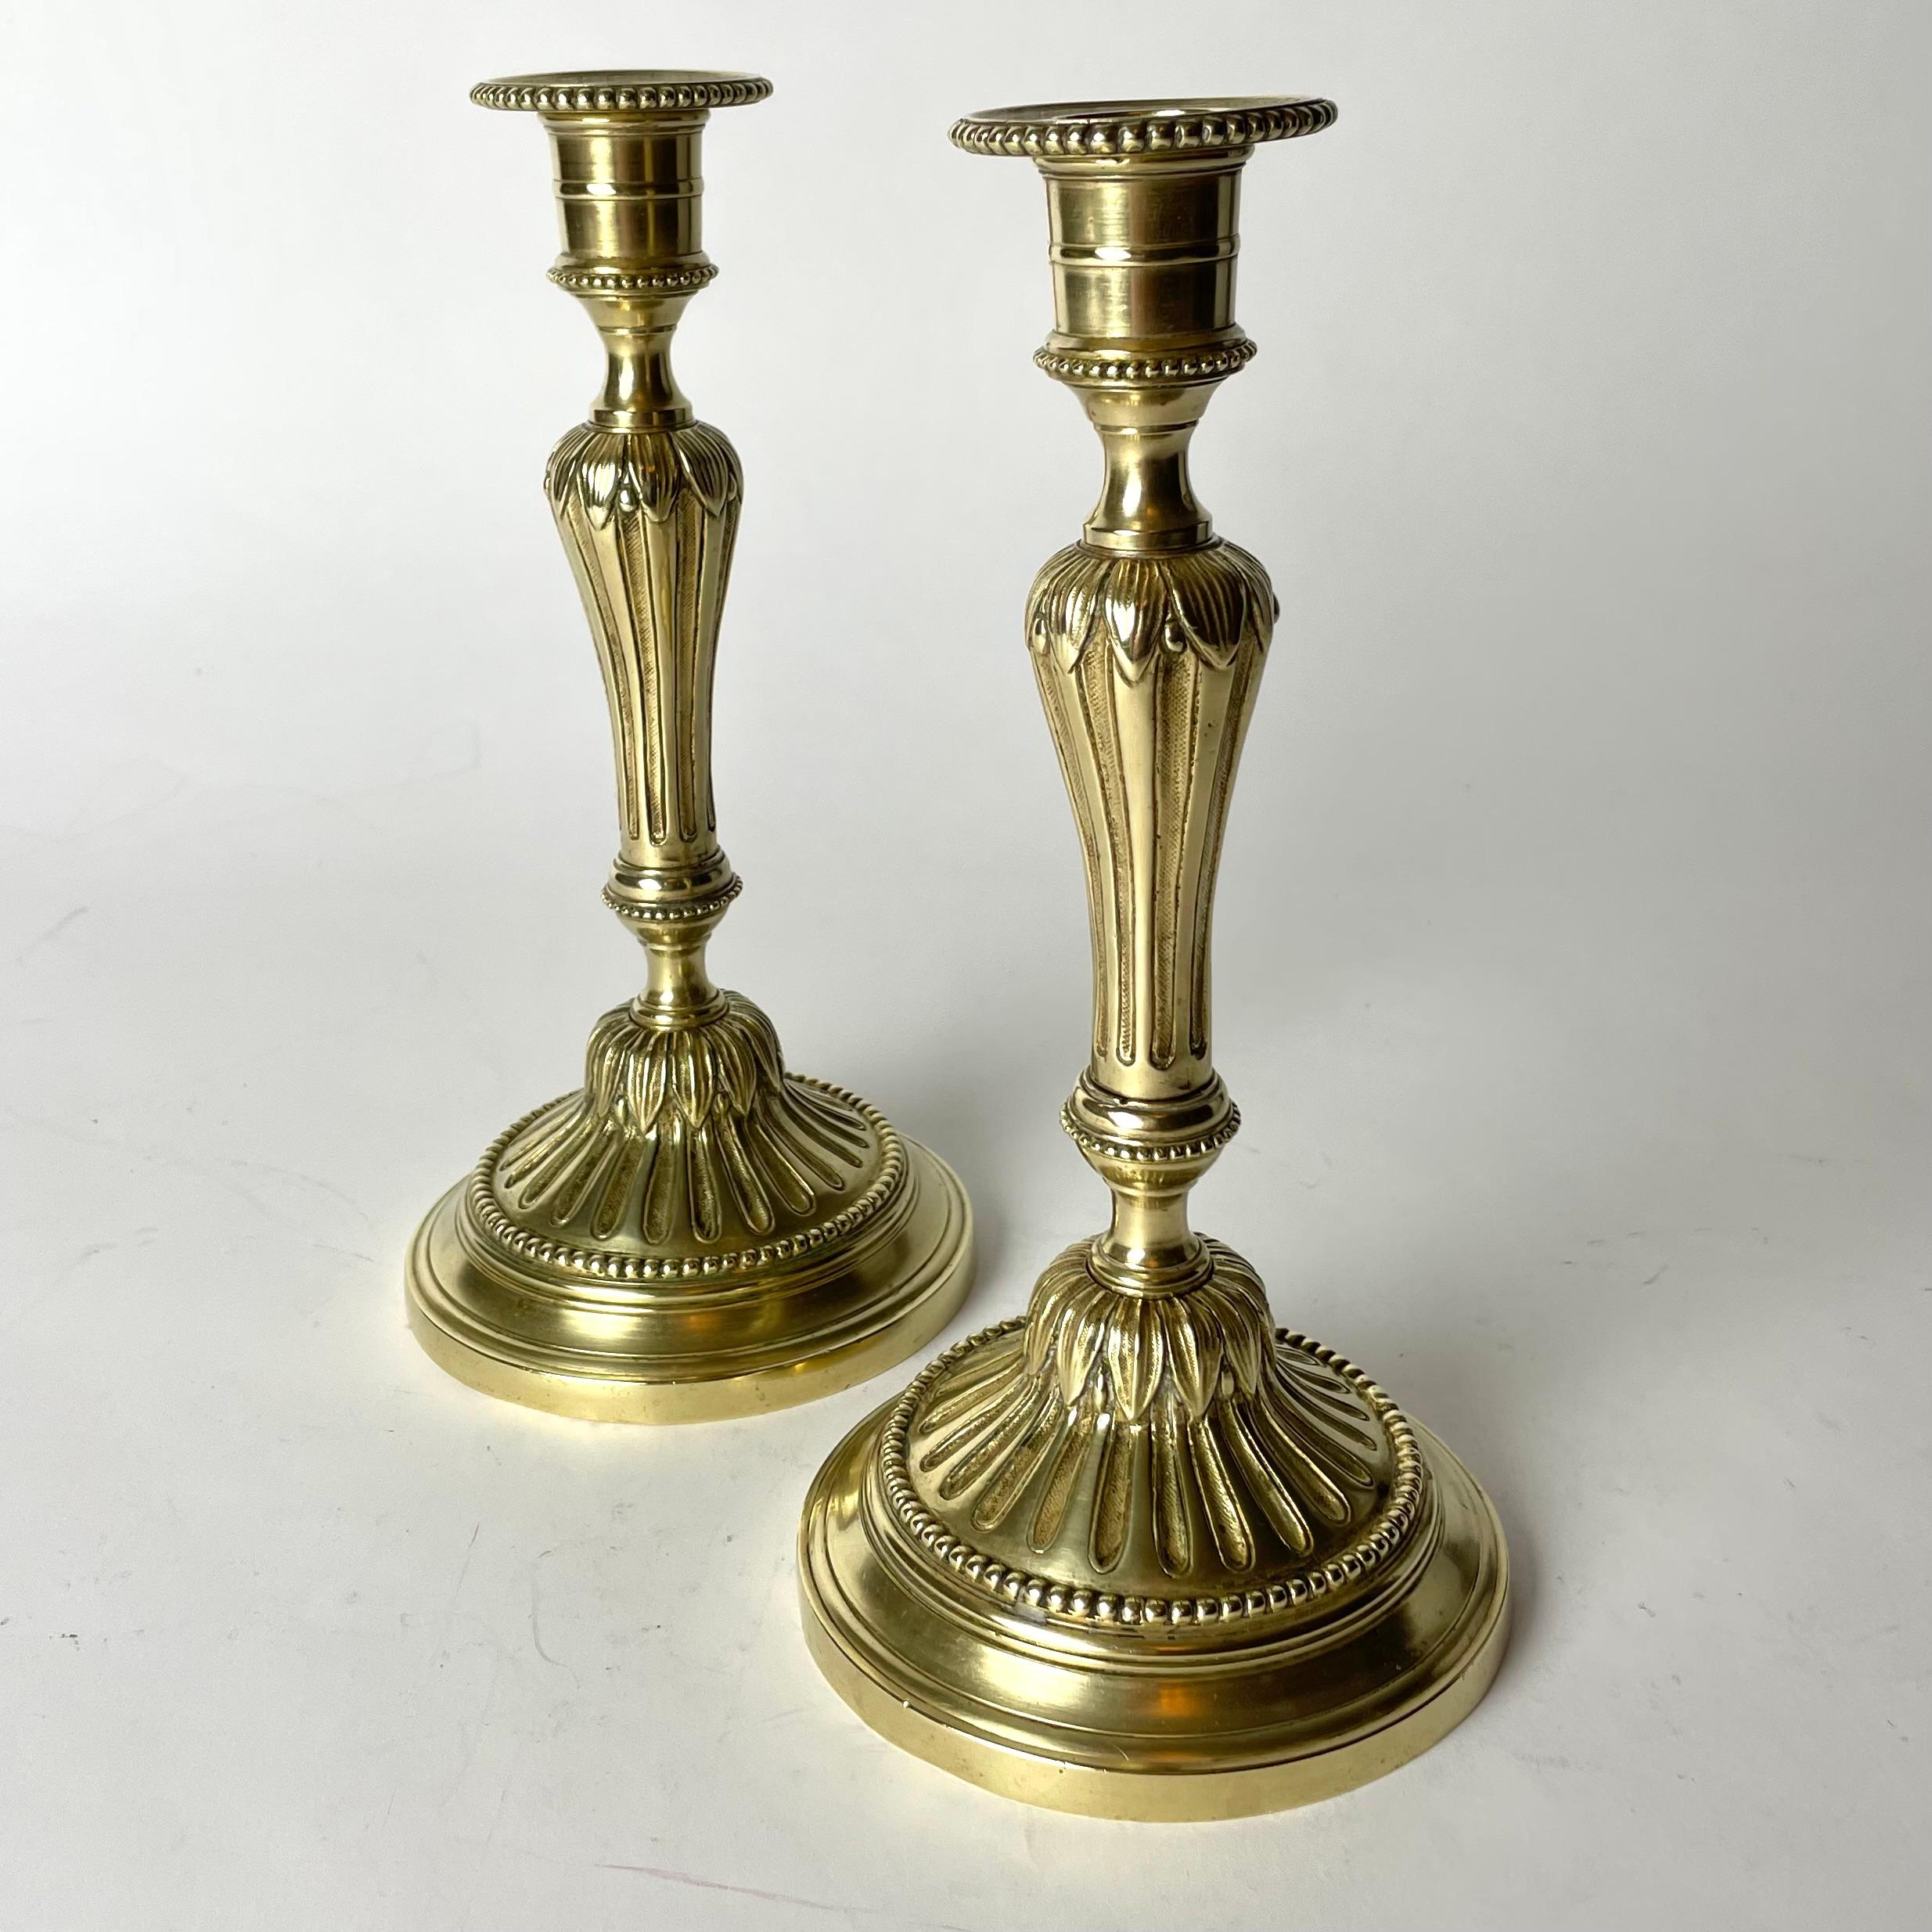 A Pair of Elegant and Ornate Brass Candlesticks from early 20th Century. In the style of Louis XVI.


Wear consistent with age and use